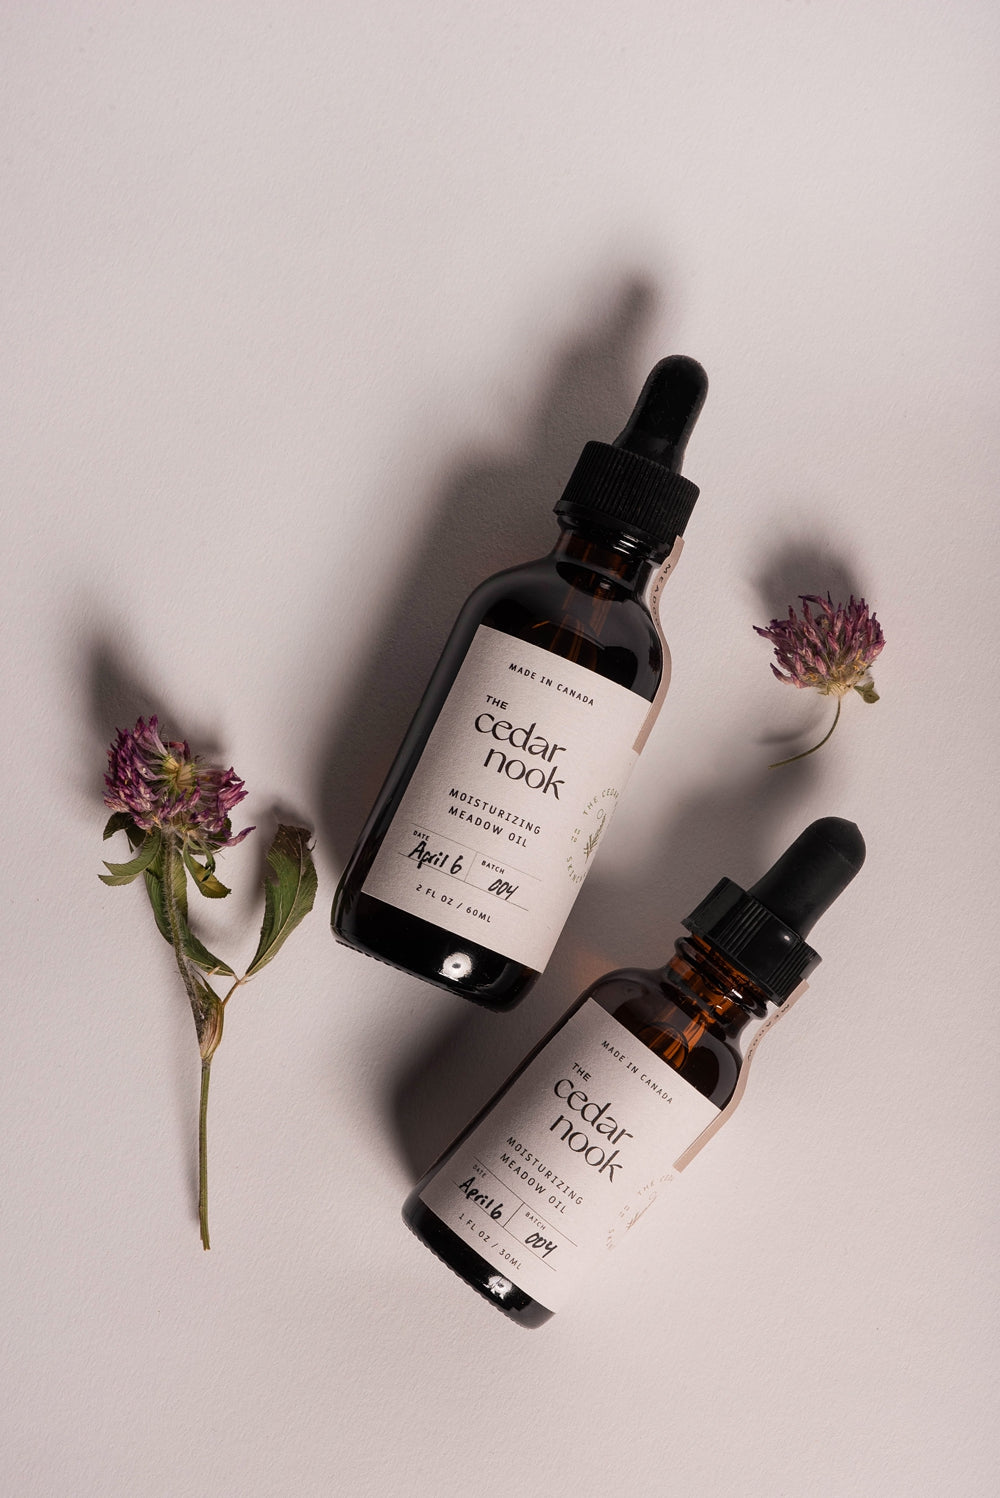 Moisturizing Meadow Oil | The Cedar Nook Face Oil both sizes 1 oz and 2 oz amber glass bottles with dropper tops showing a flat lay view surrounded by foraged red clover blossoms